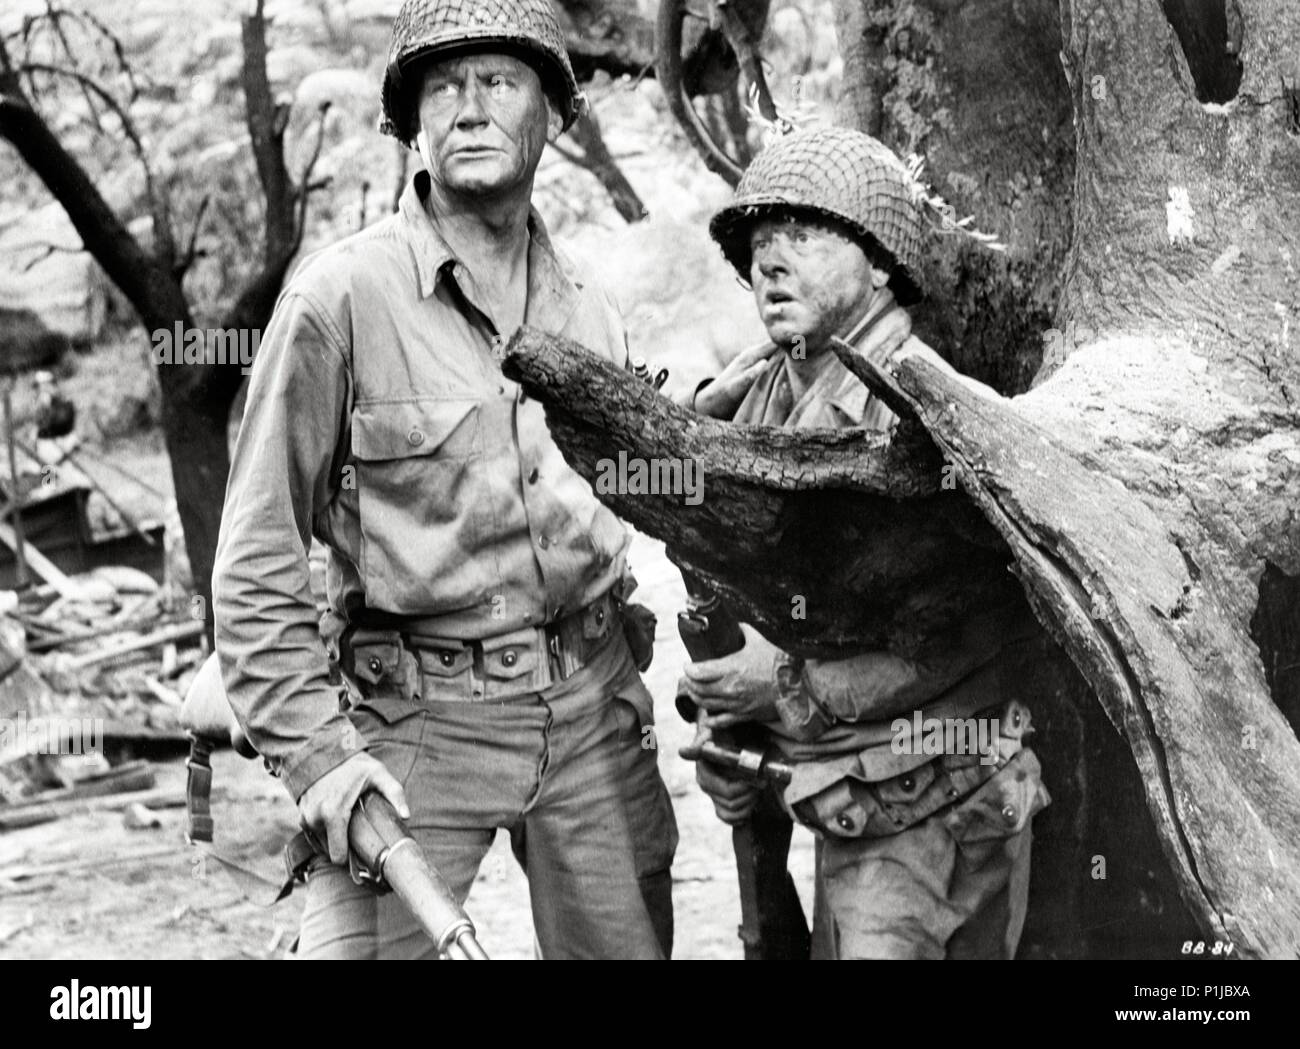 Original Film Title: THE BOLD AND THE BRAVE.  English Title: THE BOLD AND THE BRAVE.  Film Director: LEWIS R. FOSTER.  Year: 1956.  Stars: MICKEY ROONEY; DON TAYLOR. Credit: RKO RADIO PICTURES / Album Stock Photo